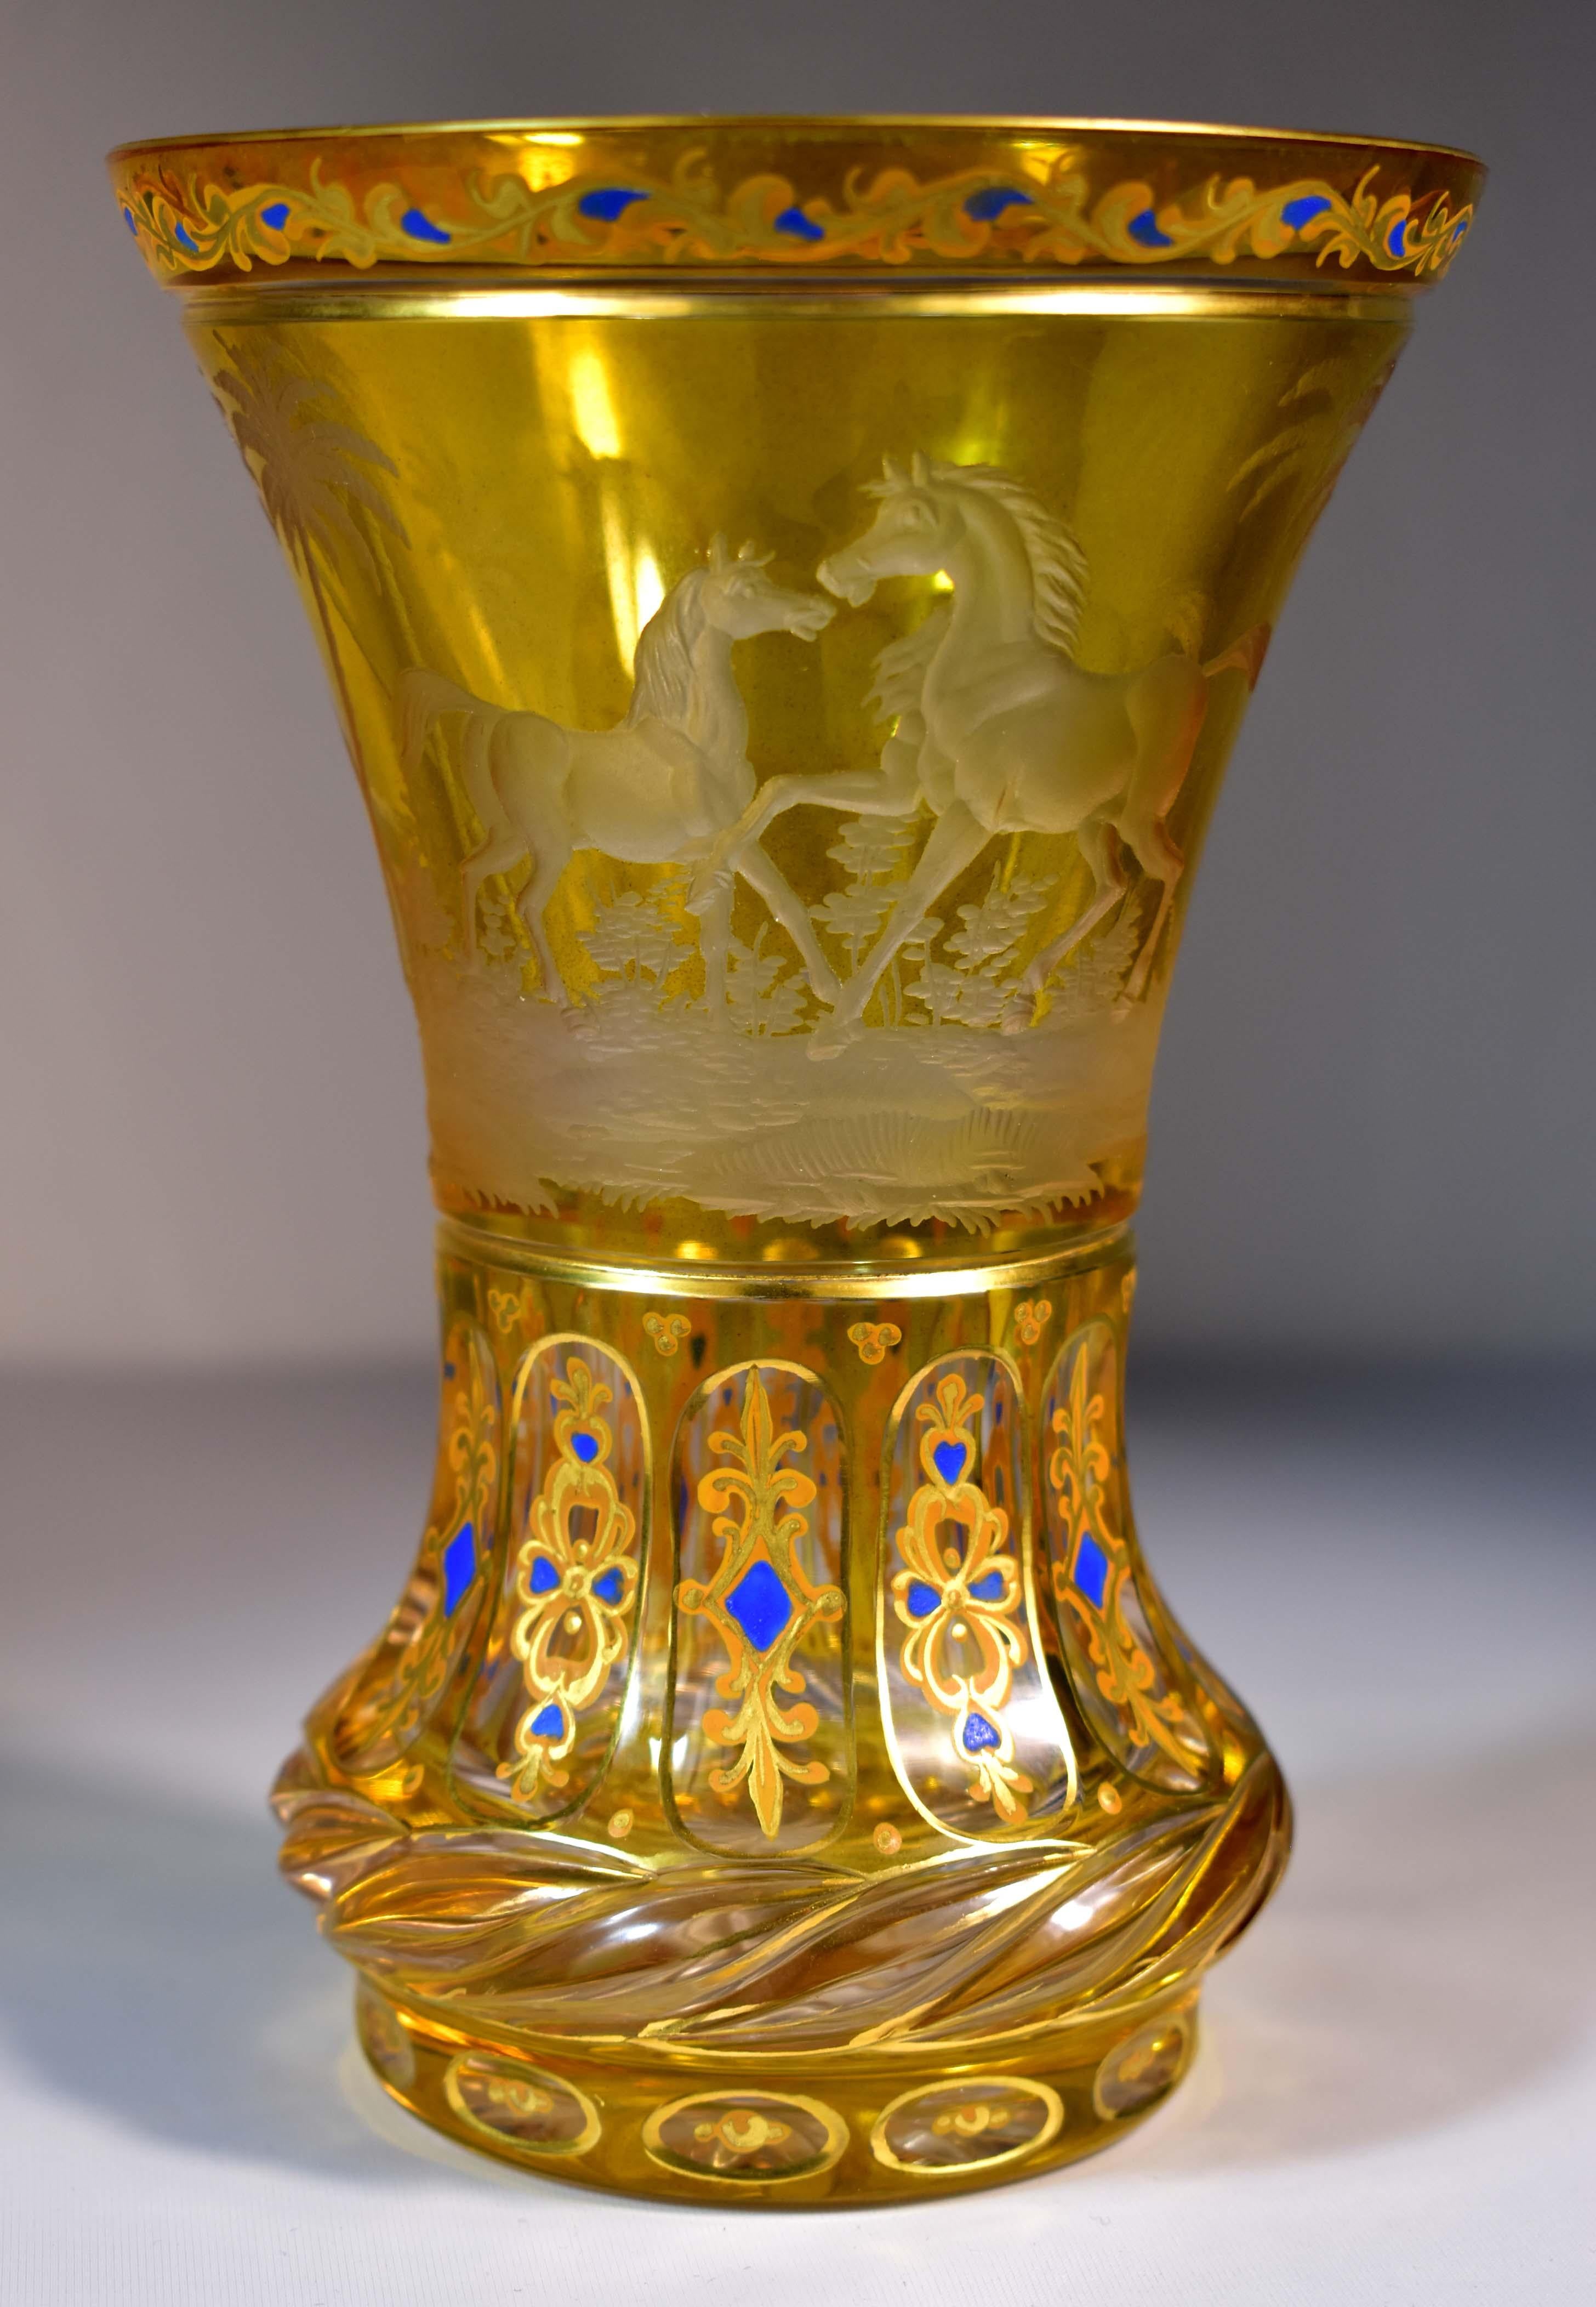 A beautiful cut cup from the turn of the 19th-20th century, Maybe the first half of the 20th century. It is a clear glass with a yellow lazure, The goblet is cut, decorated with engraving and gilded painting. The engraving is with the motif of